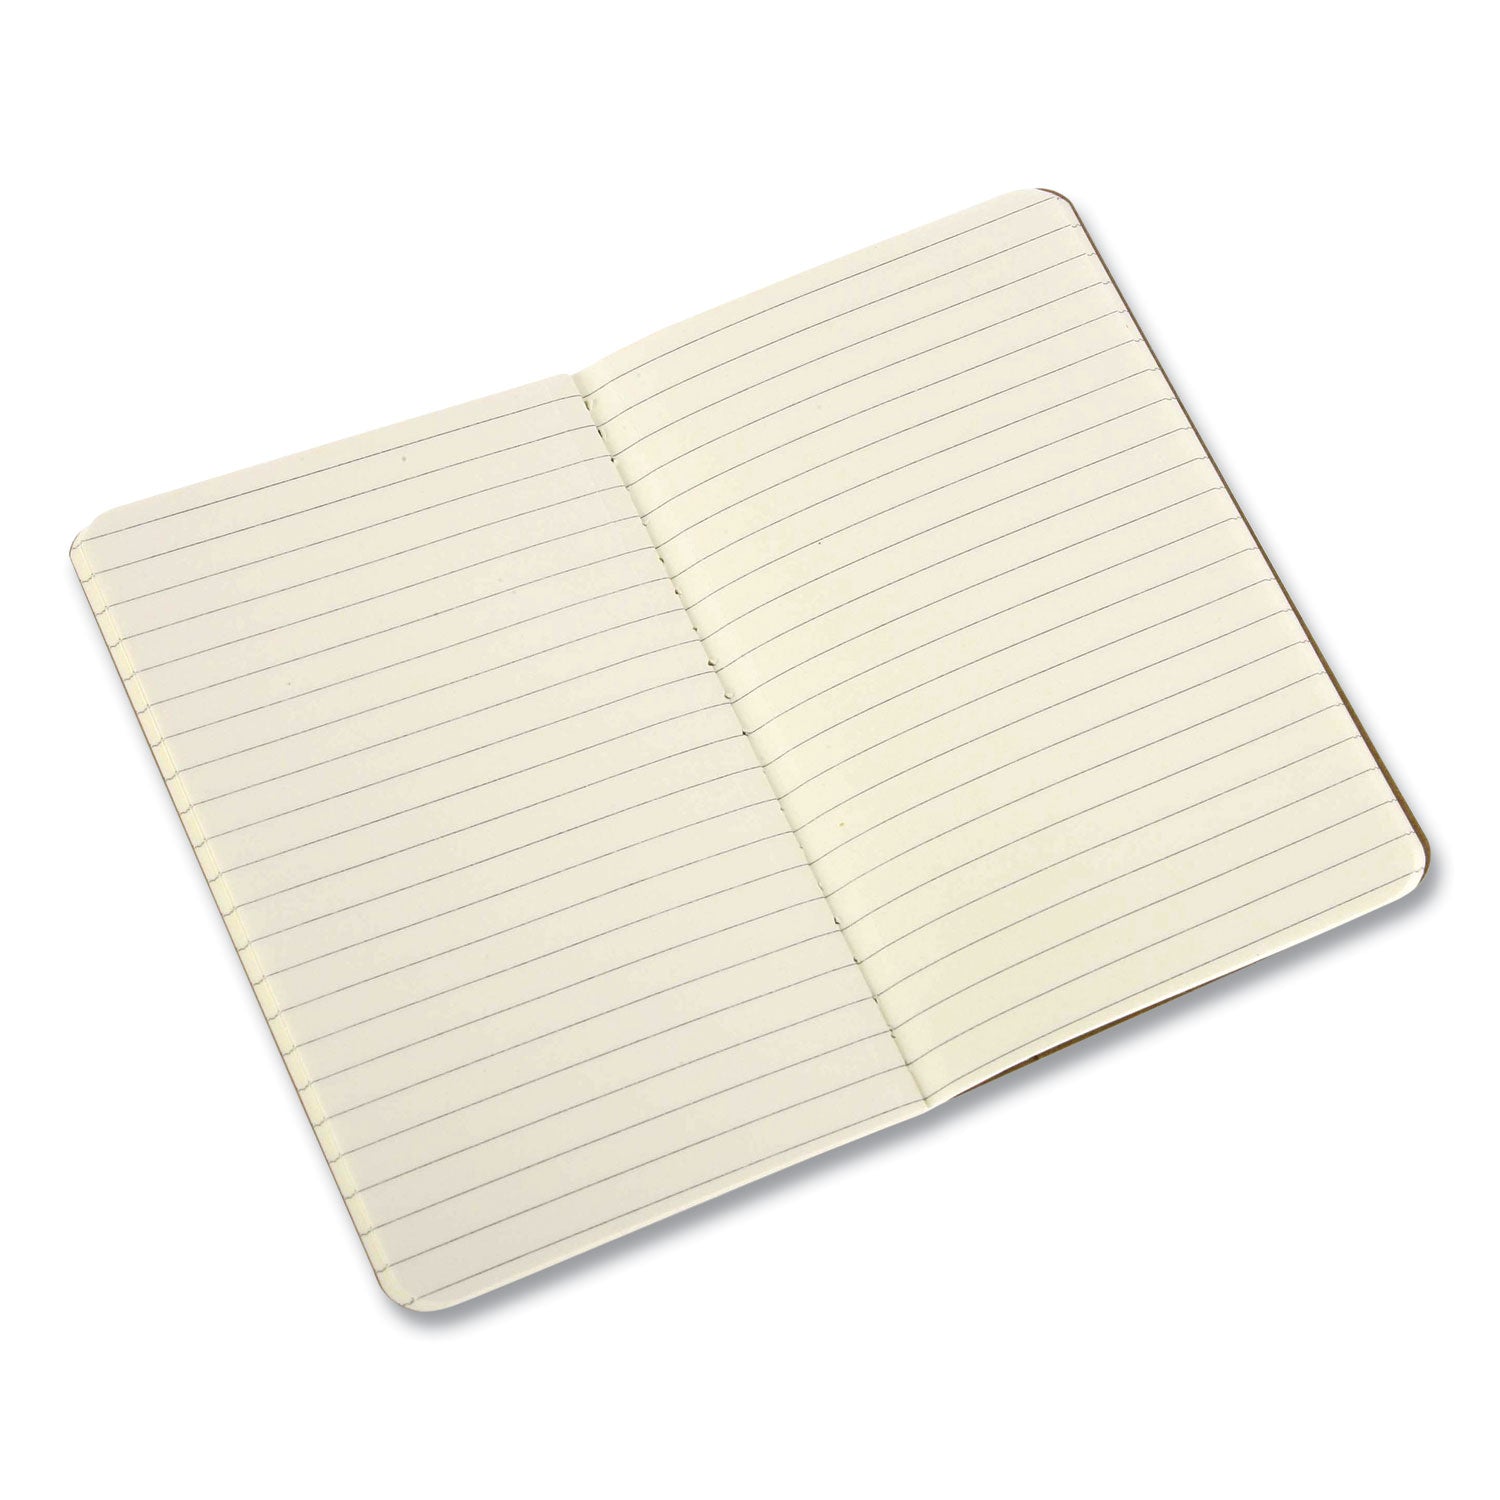 cahier-journal-1-subject-narrow-rule-brown-kraft-cover-32-55-x-35-sheets-3-pack_hbg704925 - 2